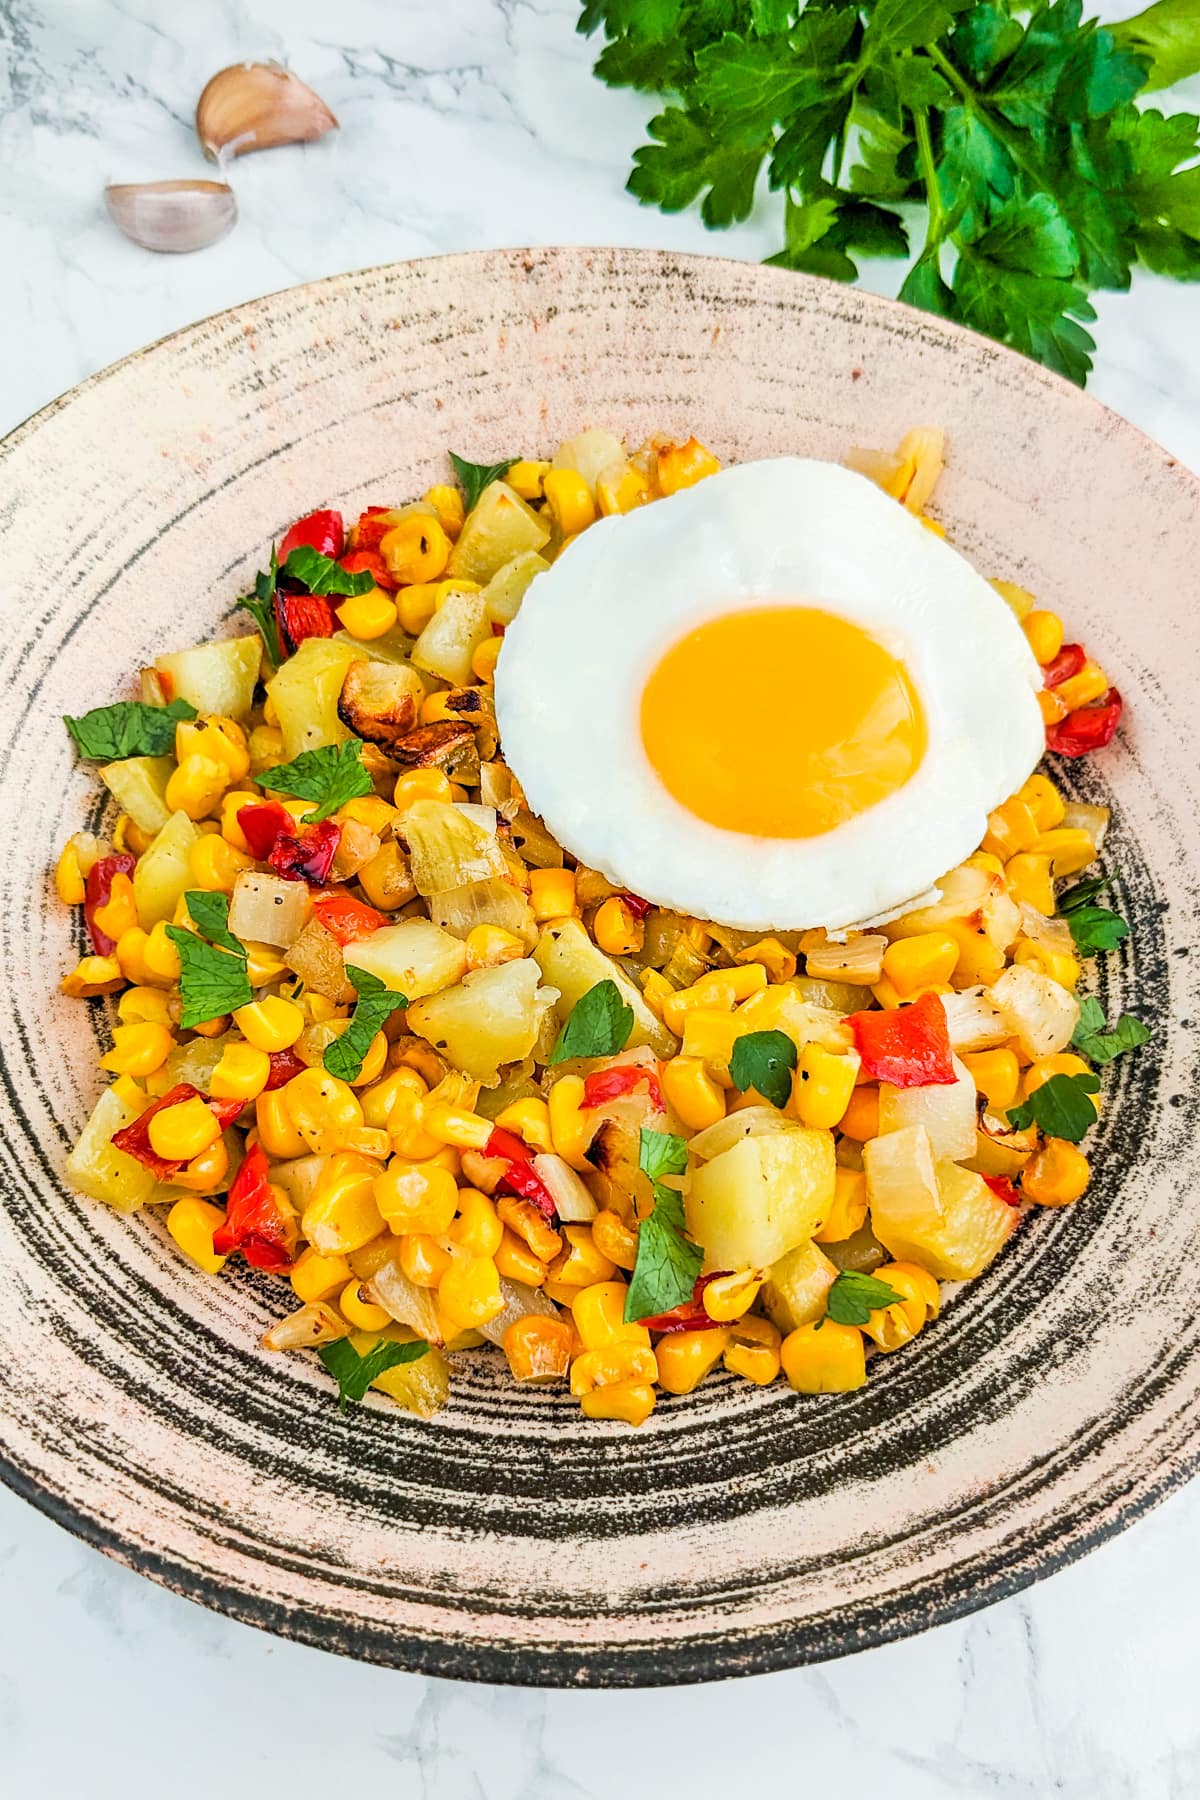 Vintage plate with corn hash, a fried egg, garlic and parsley.